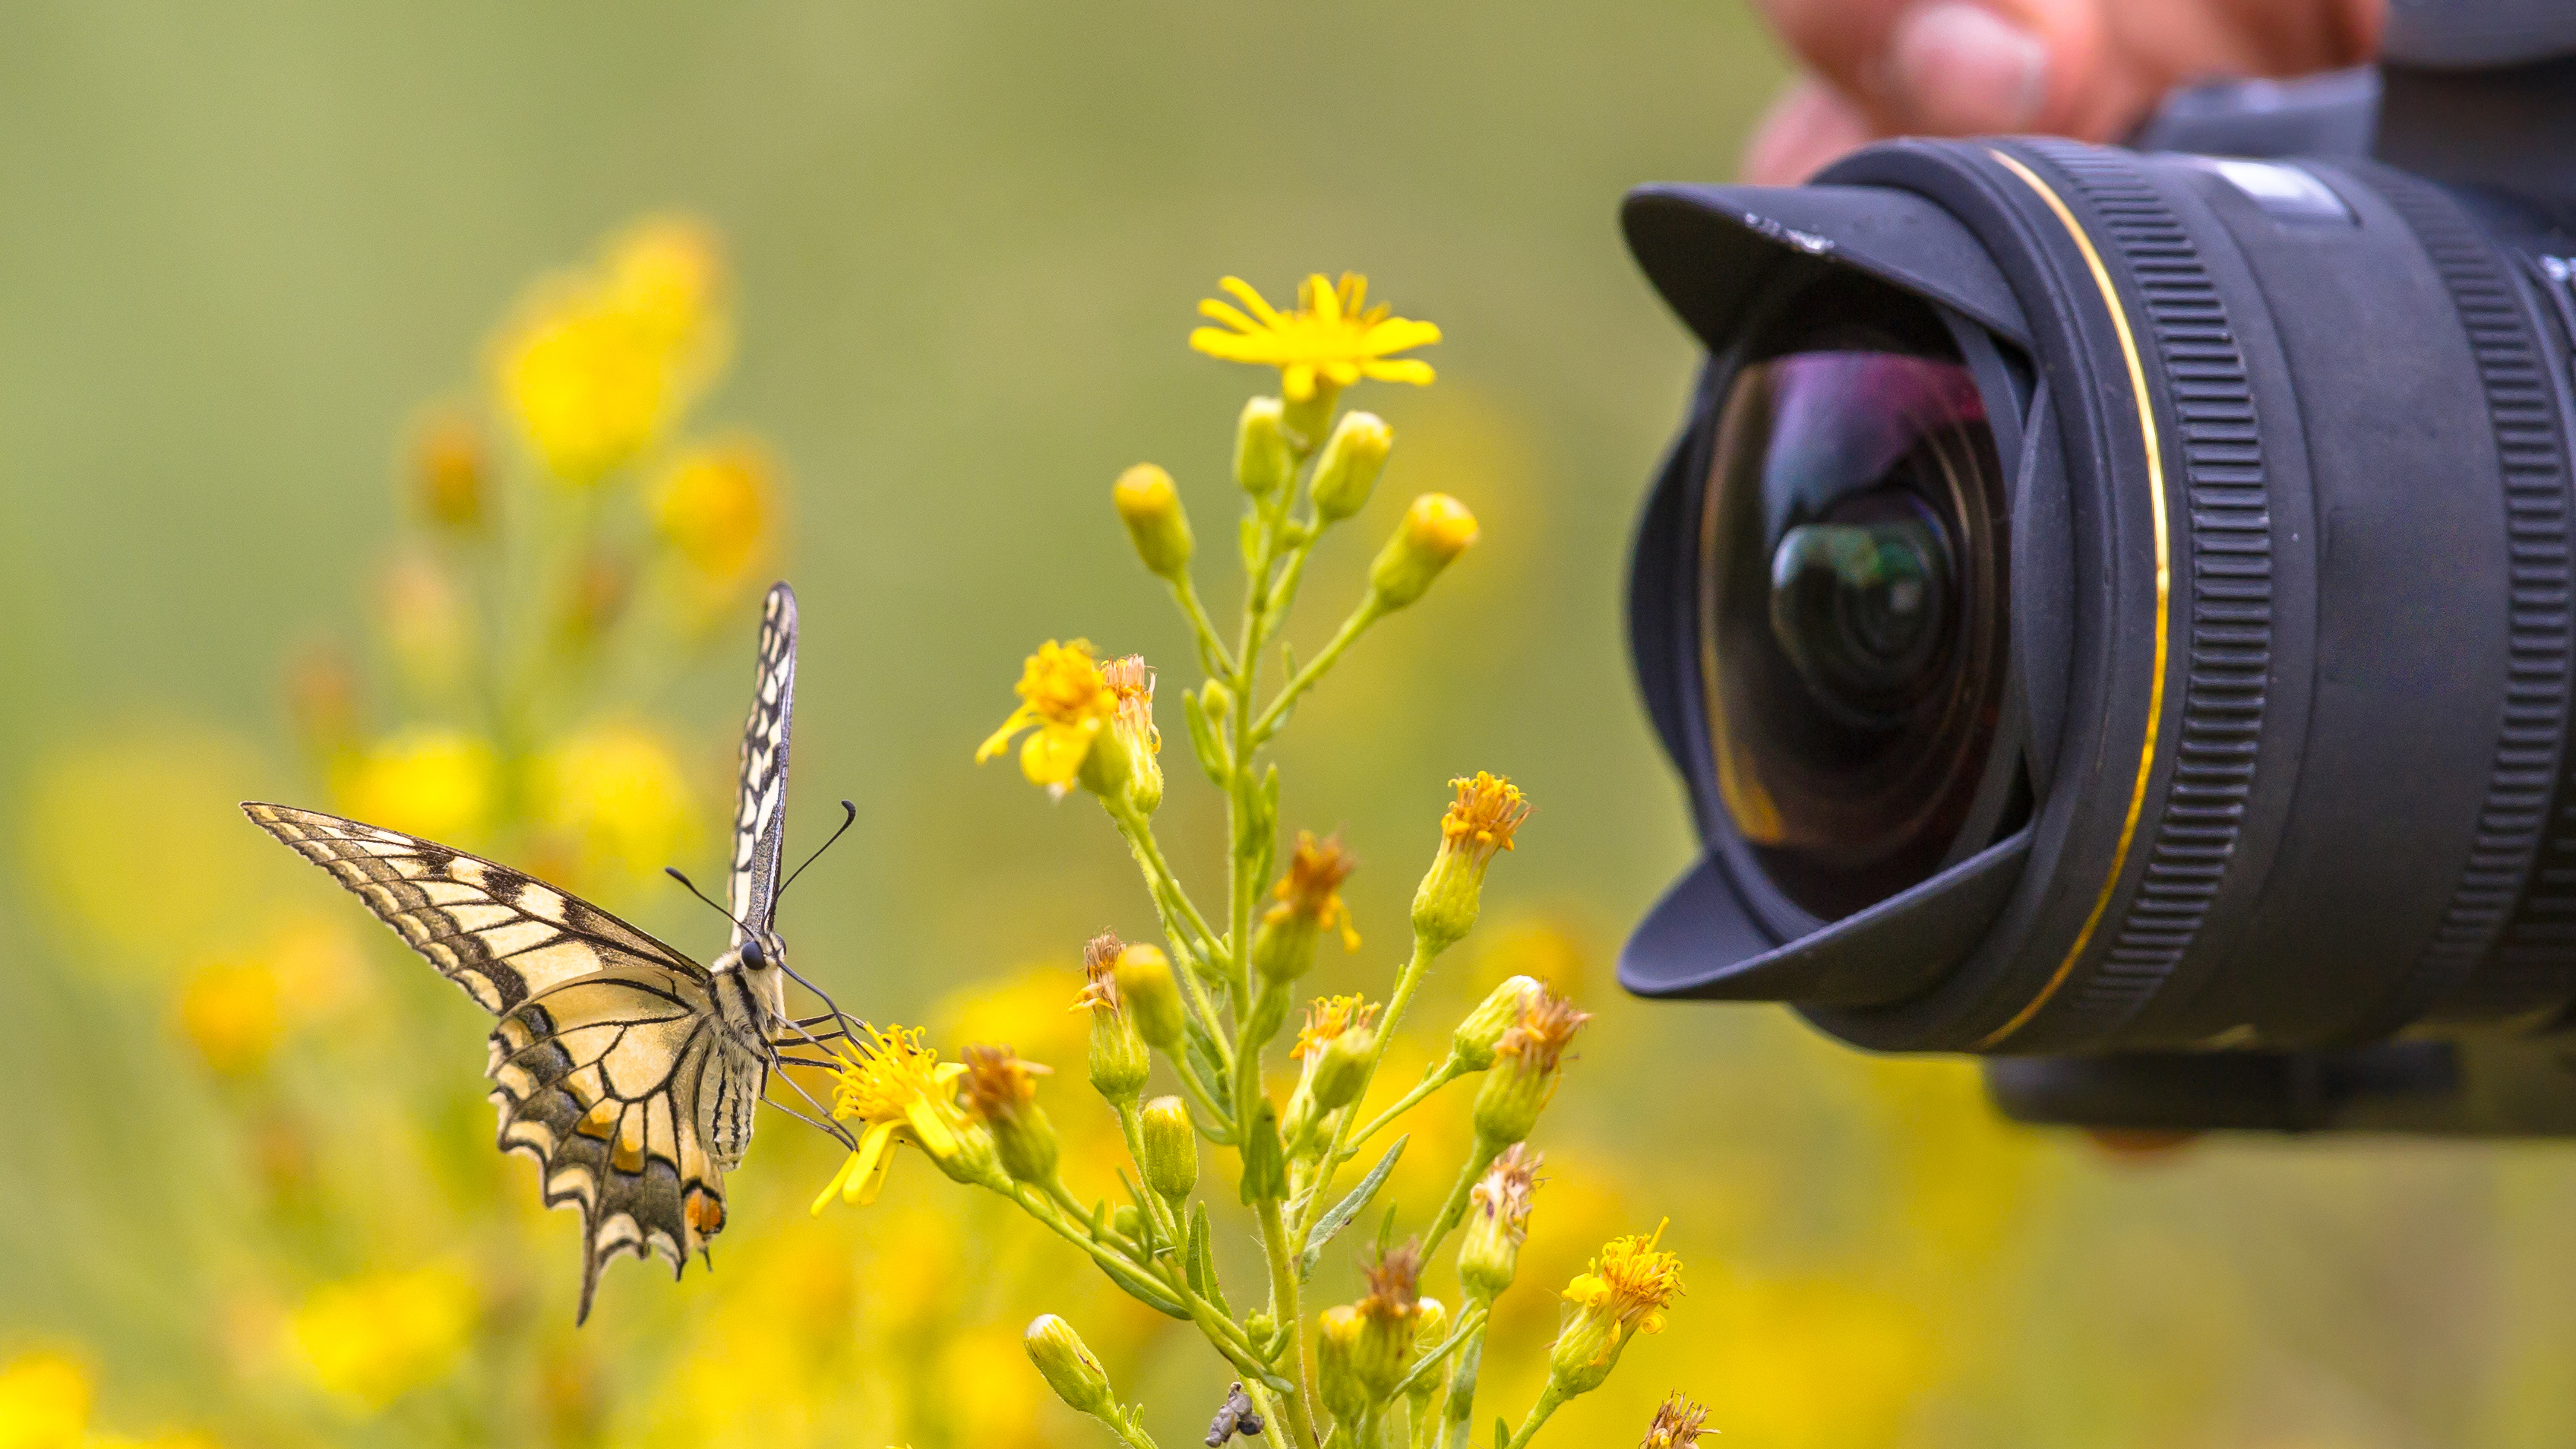 A camera lens next to a flower and butterfly